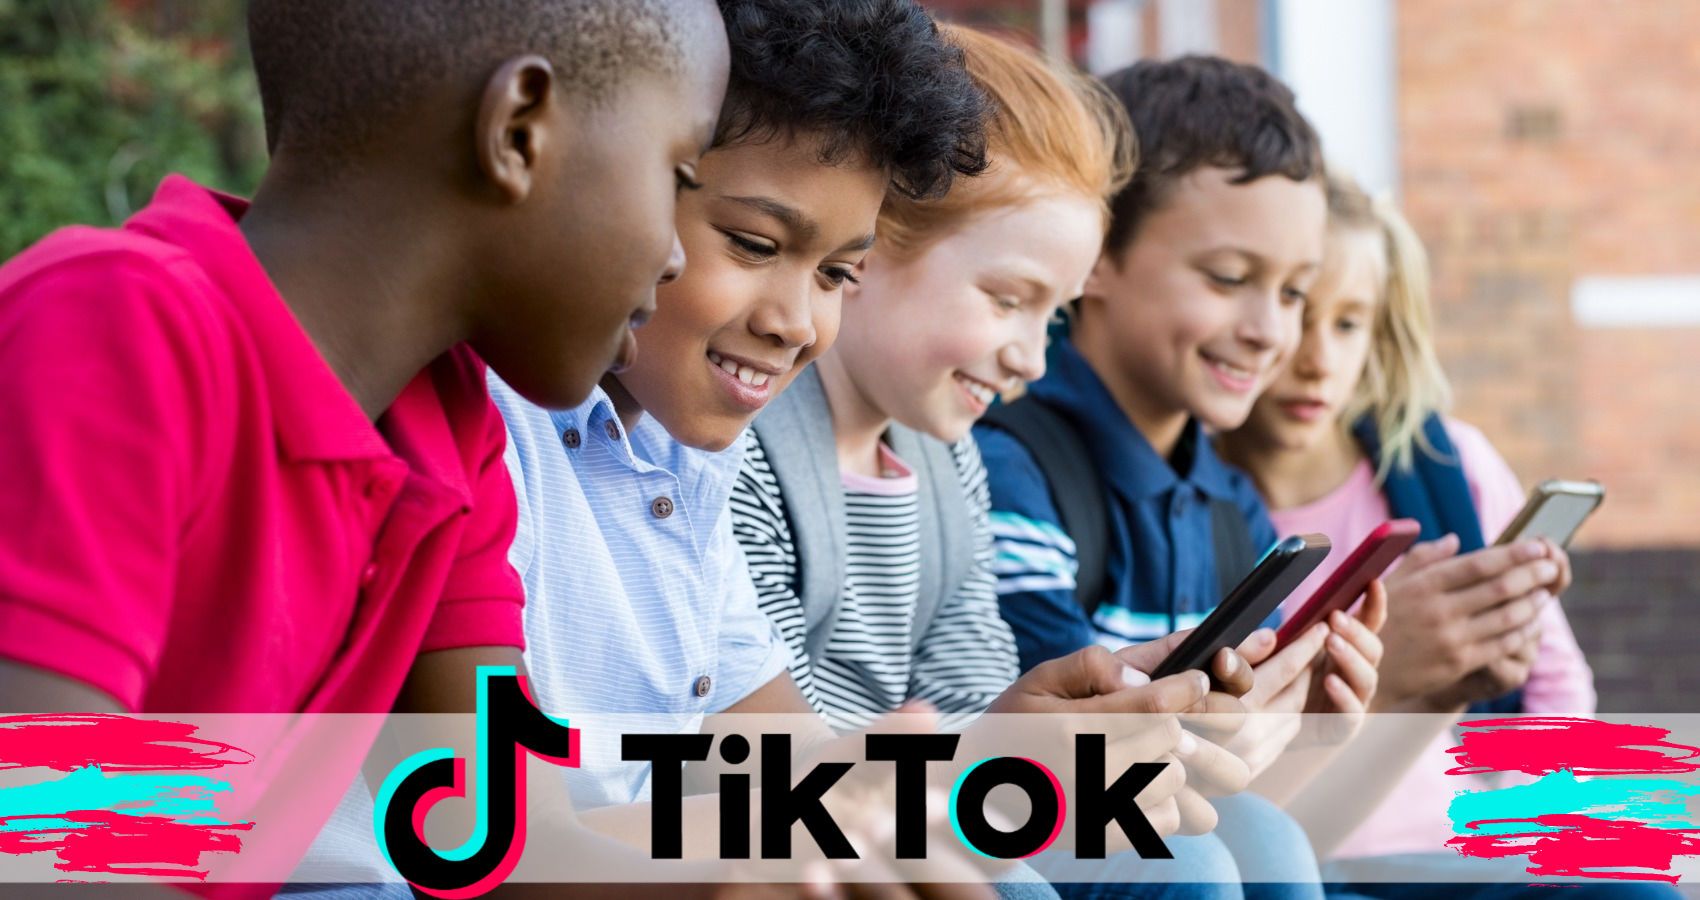 Is TikTok Safe For Kids? Here's What Parents Need To Know